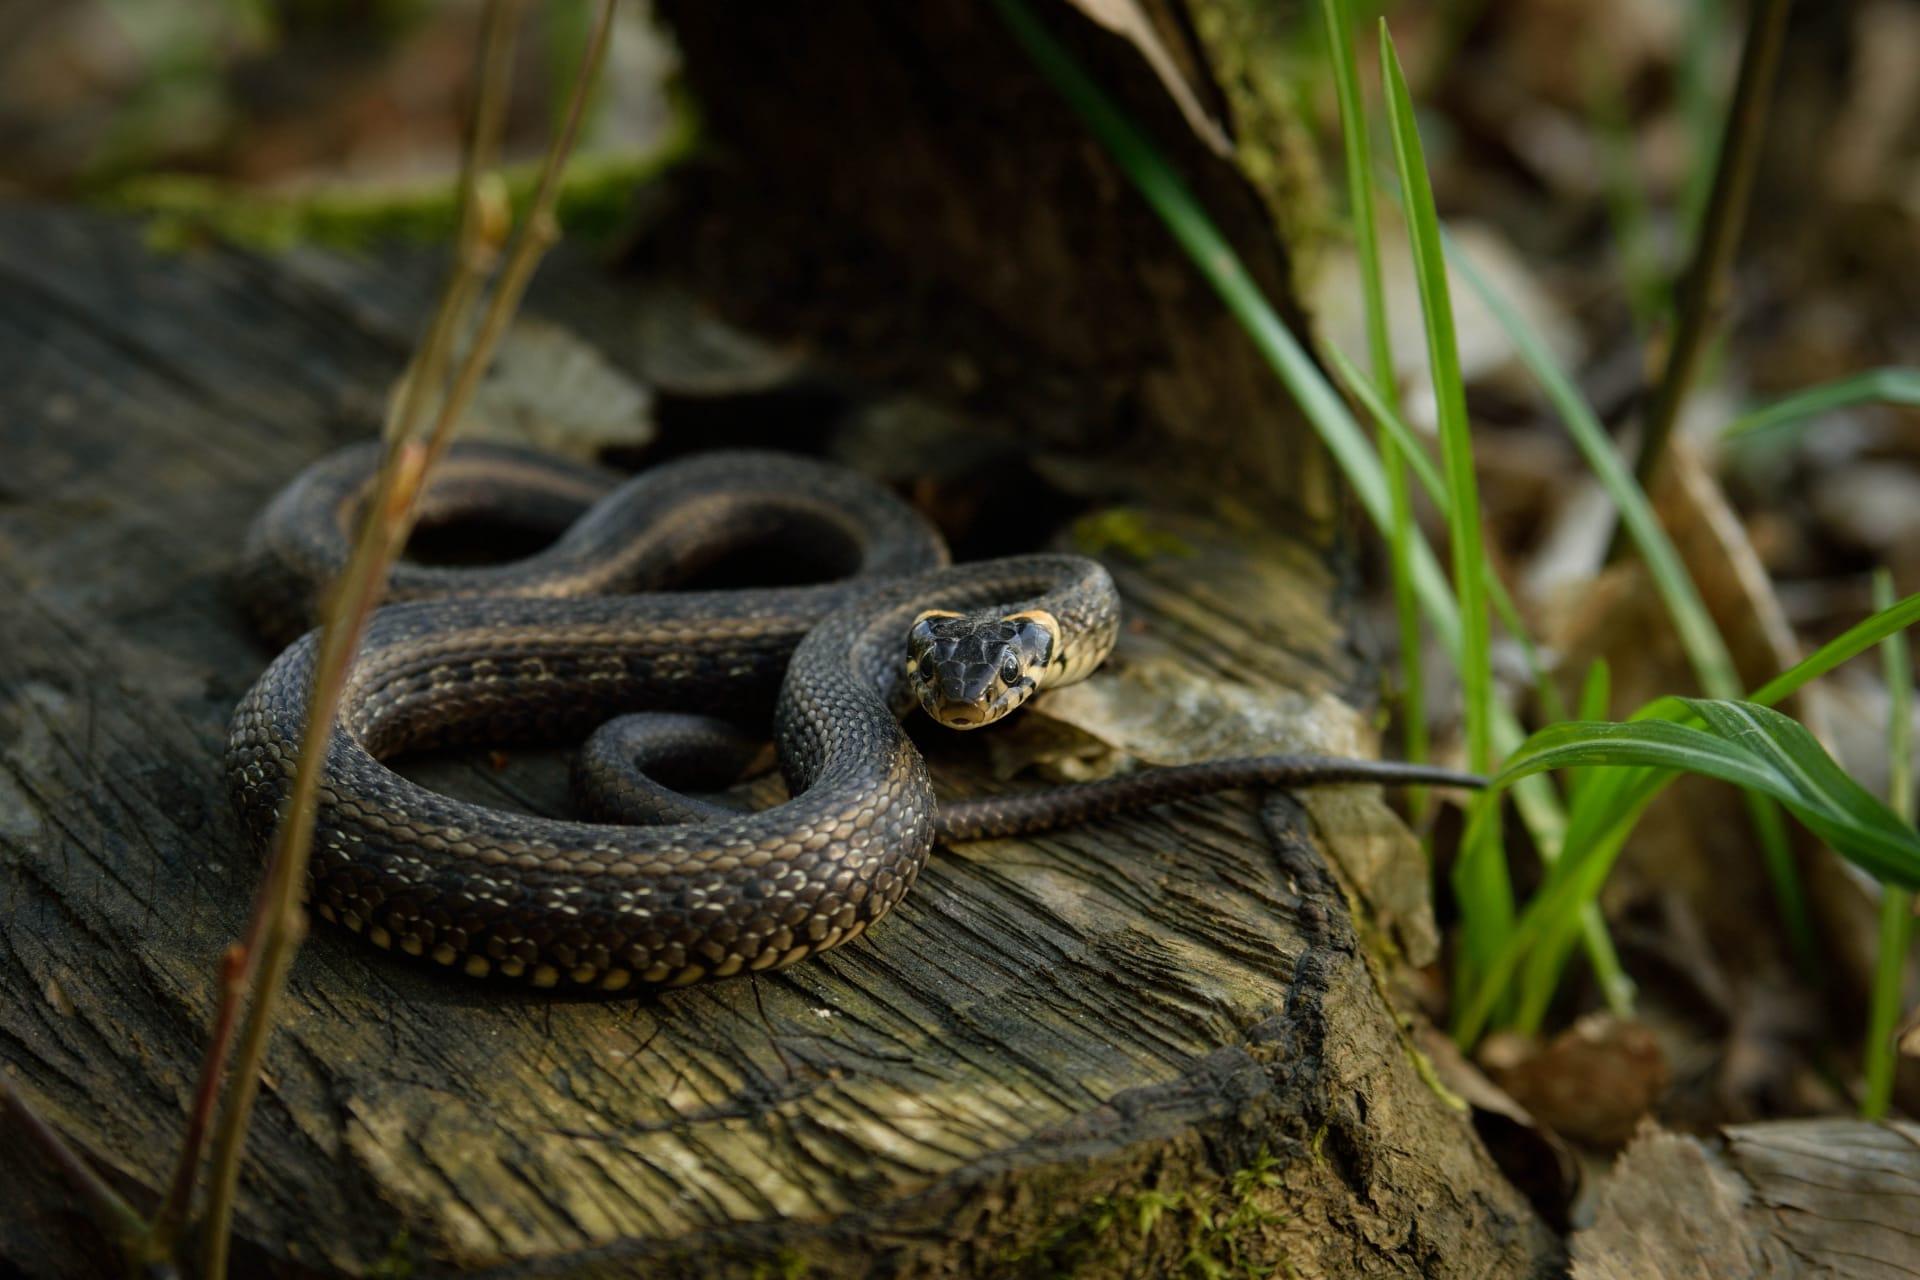 Grass snake pictures